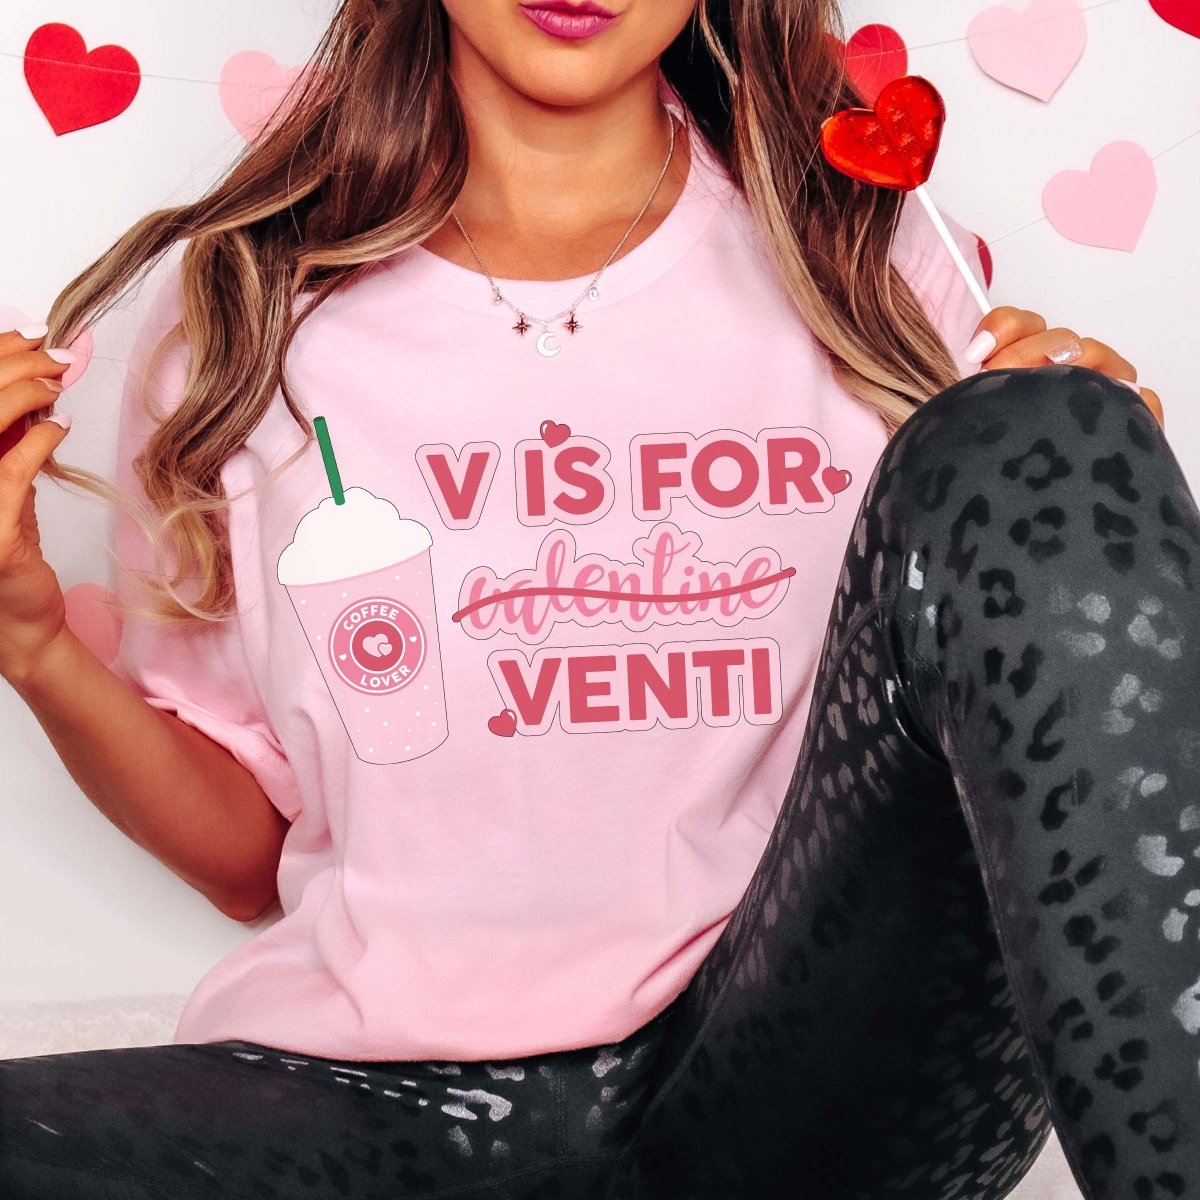 V Is For Venti Wholesale Tee - Limeberry Designs